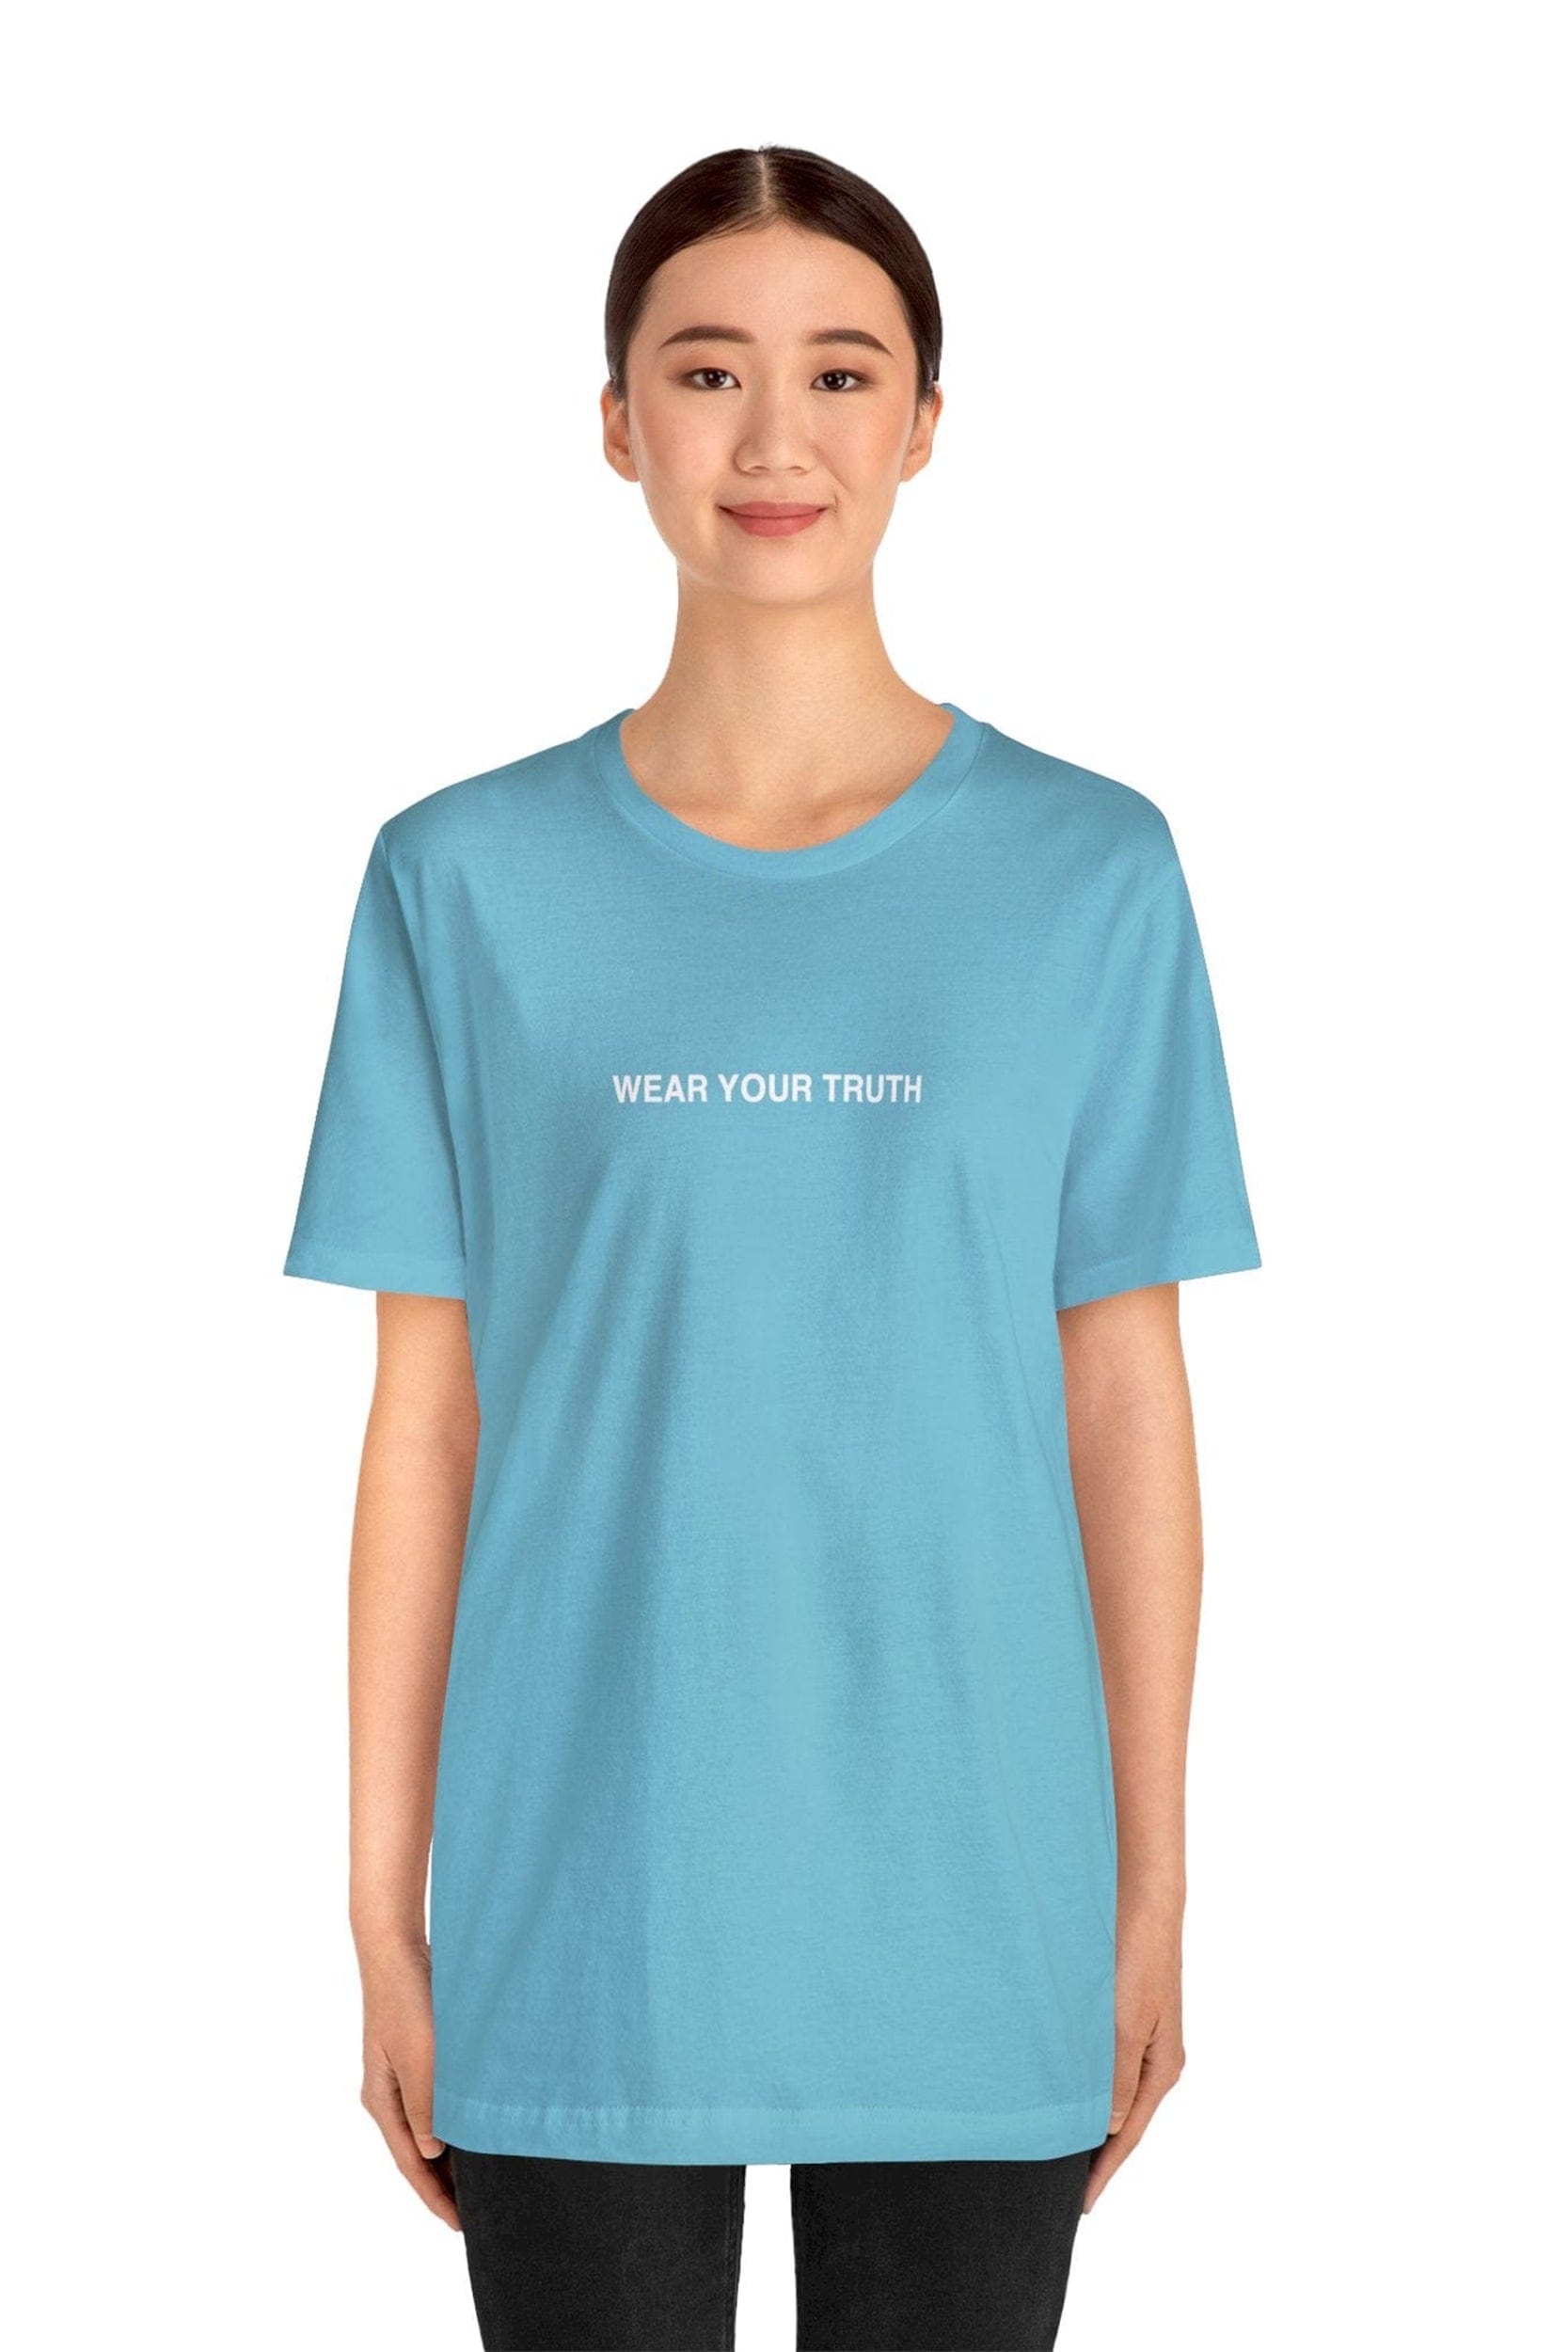 "WEAR YOUR TRUTH" T-Shirt